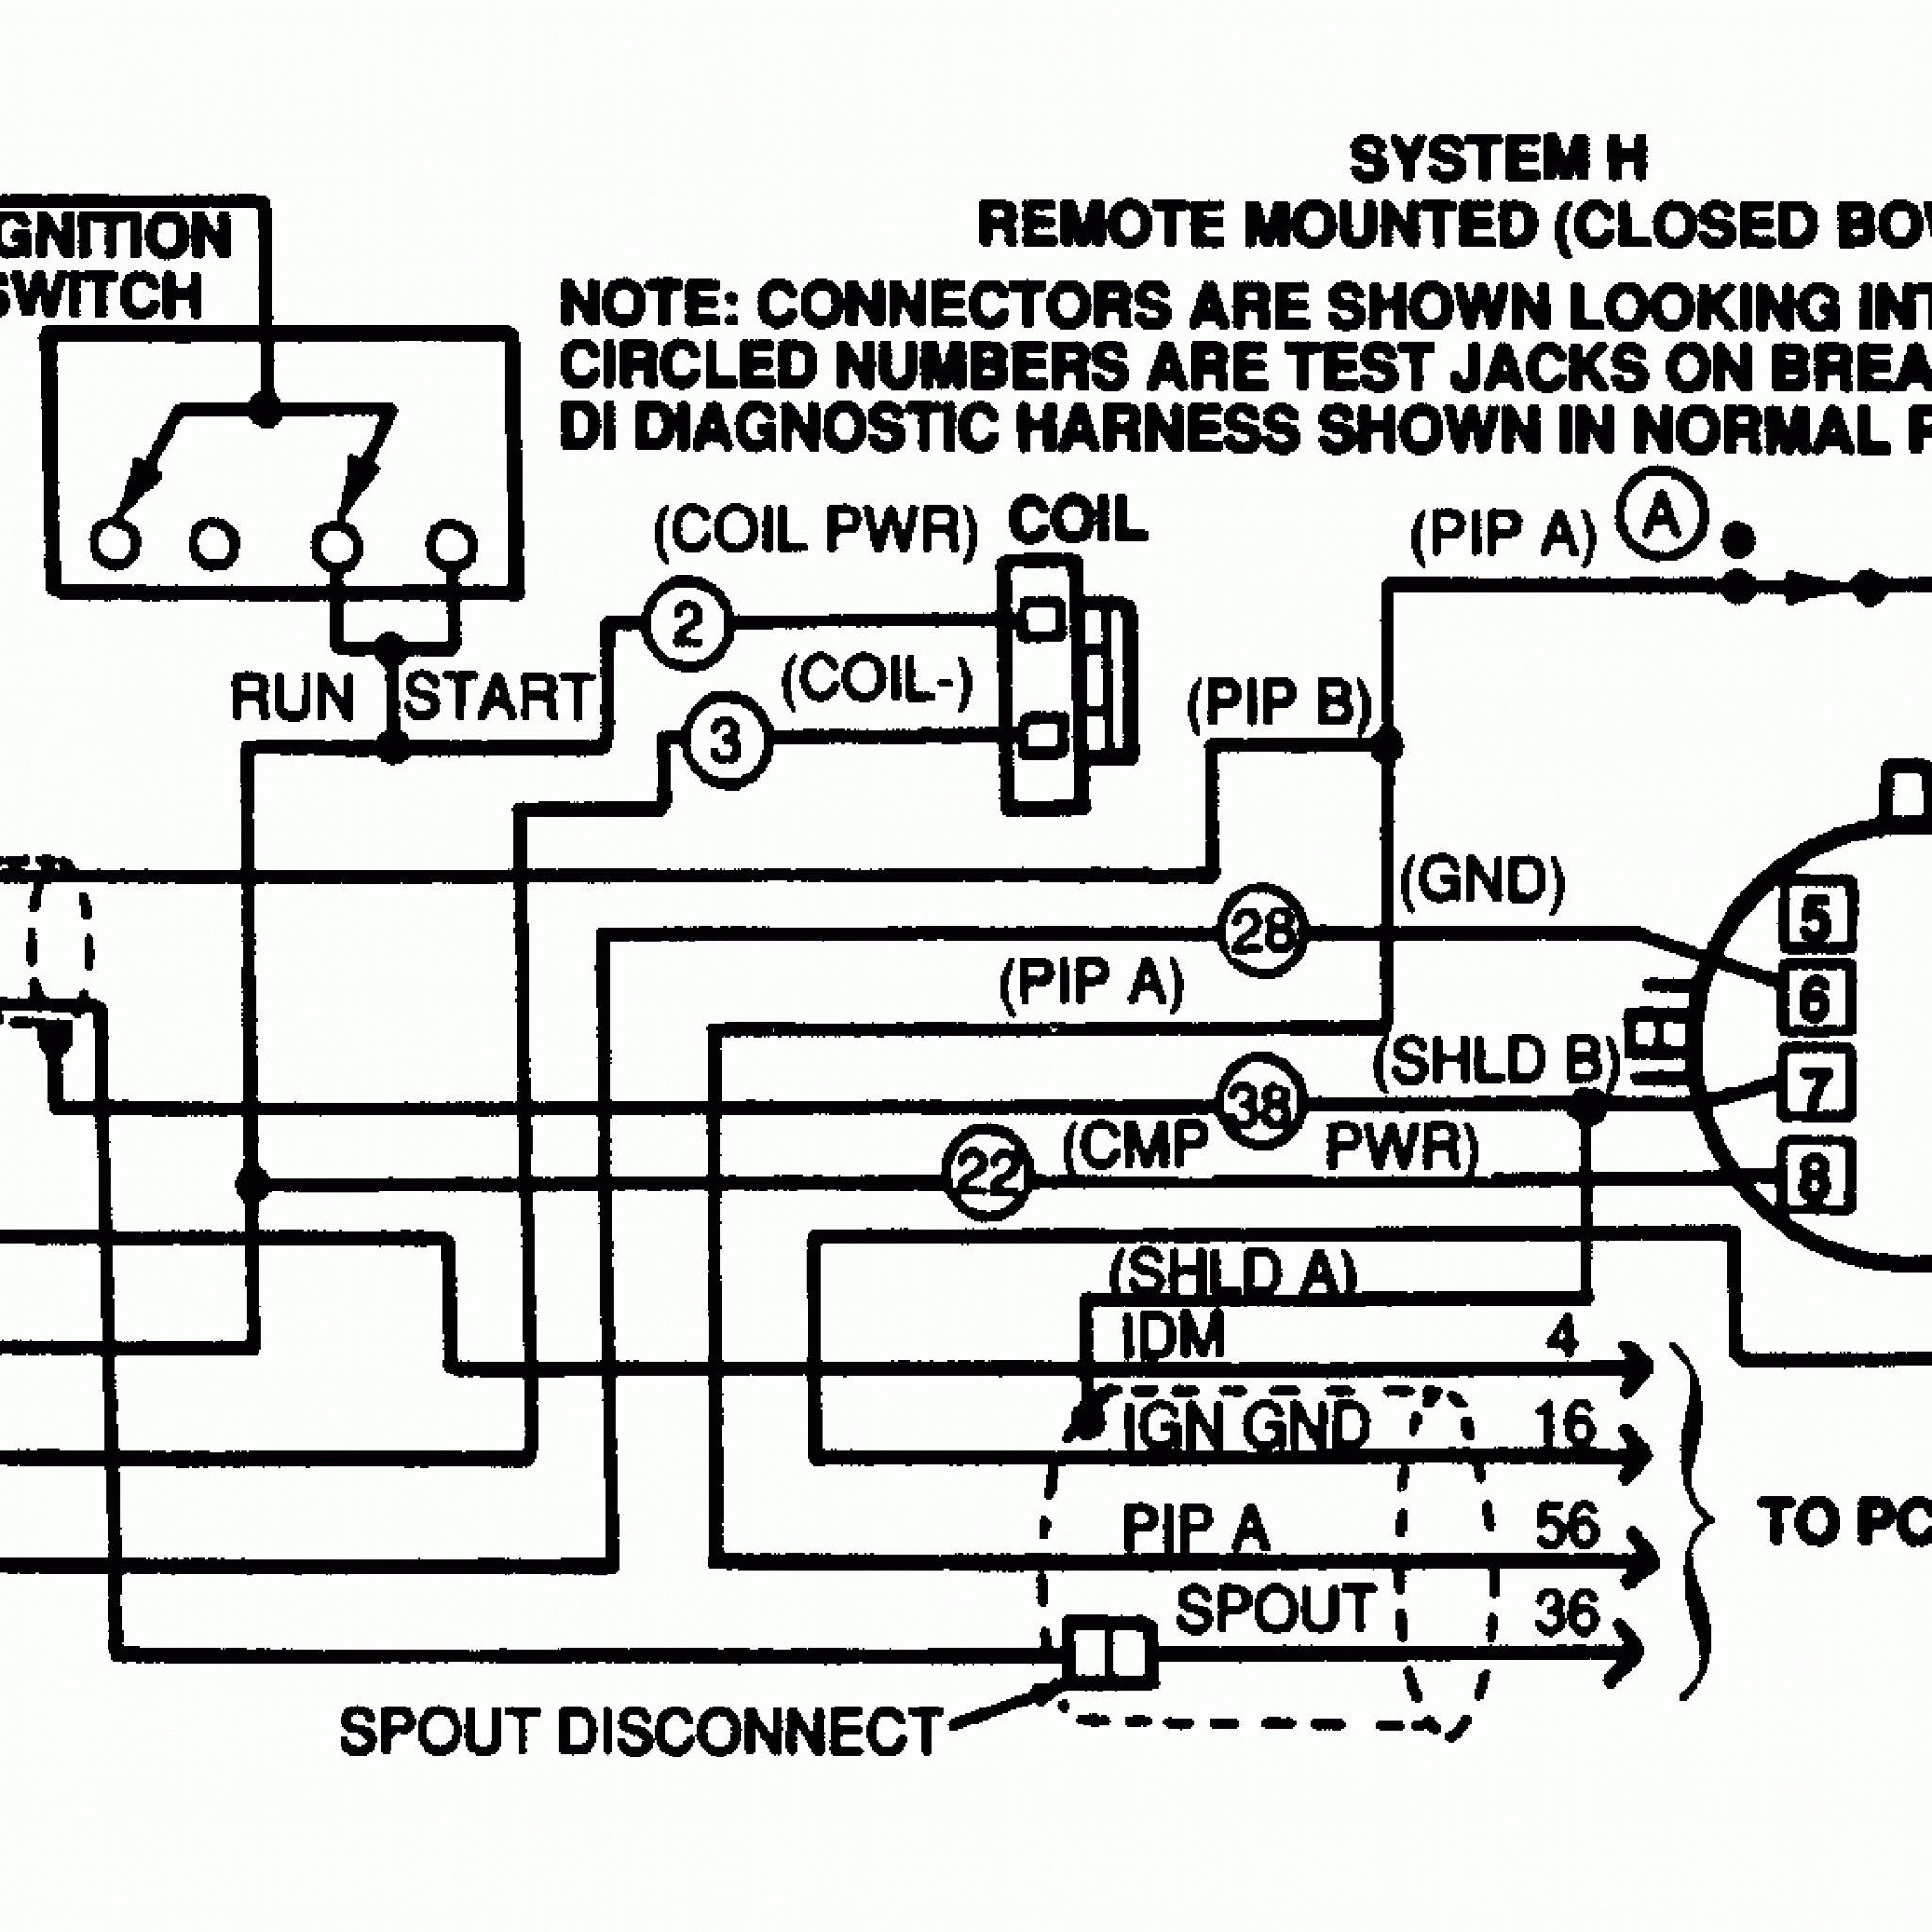 Diagram] Wiring Diagram Ford 302 Firing Full Version Hd | Wiring and